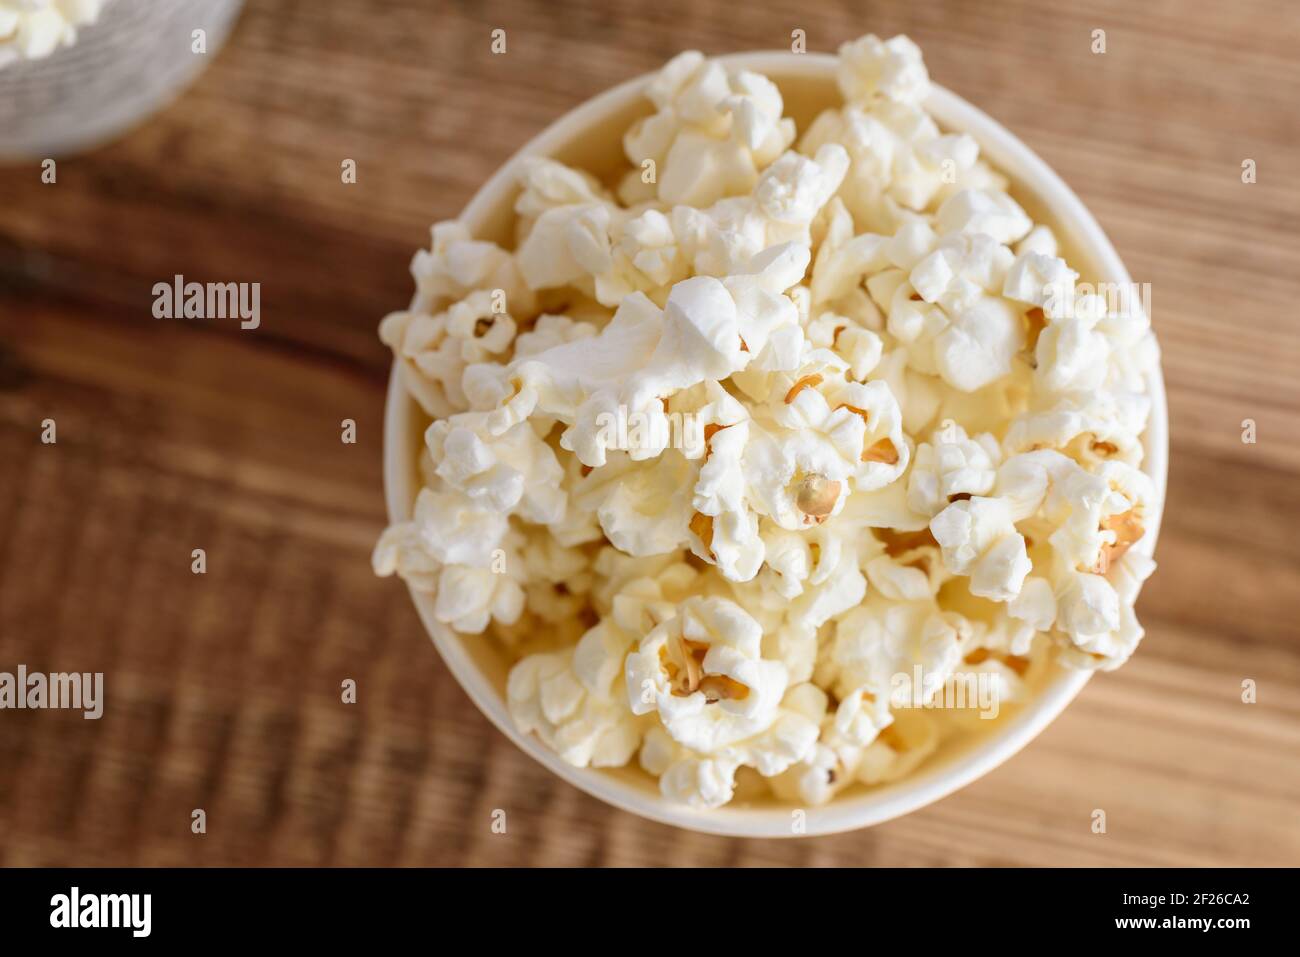 A bucket of popcorn, top-view, warm colors, light brown wooden background, flat lay, daylight macro close-up Stock Photo